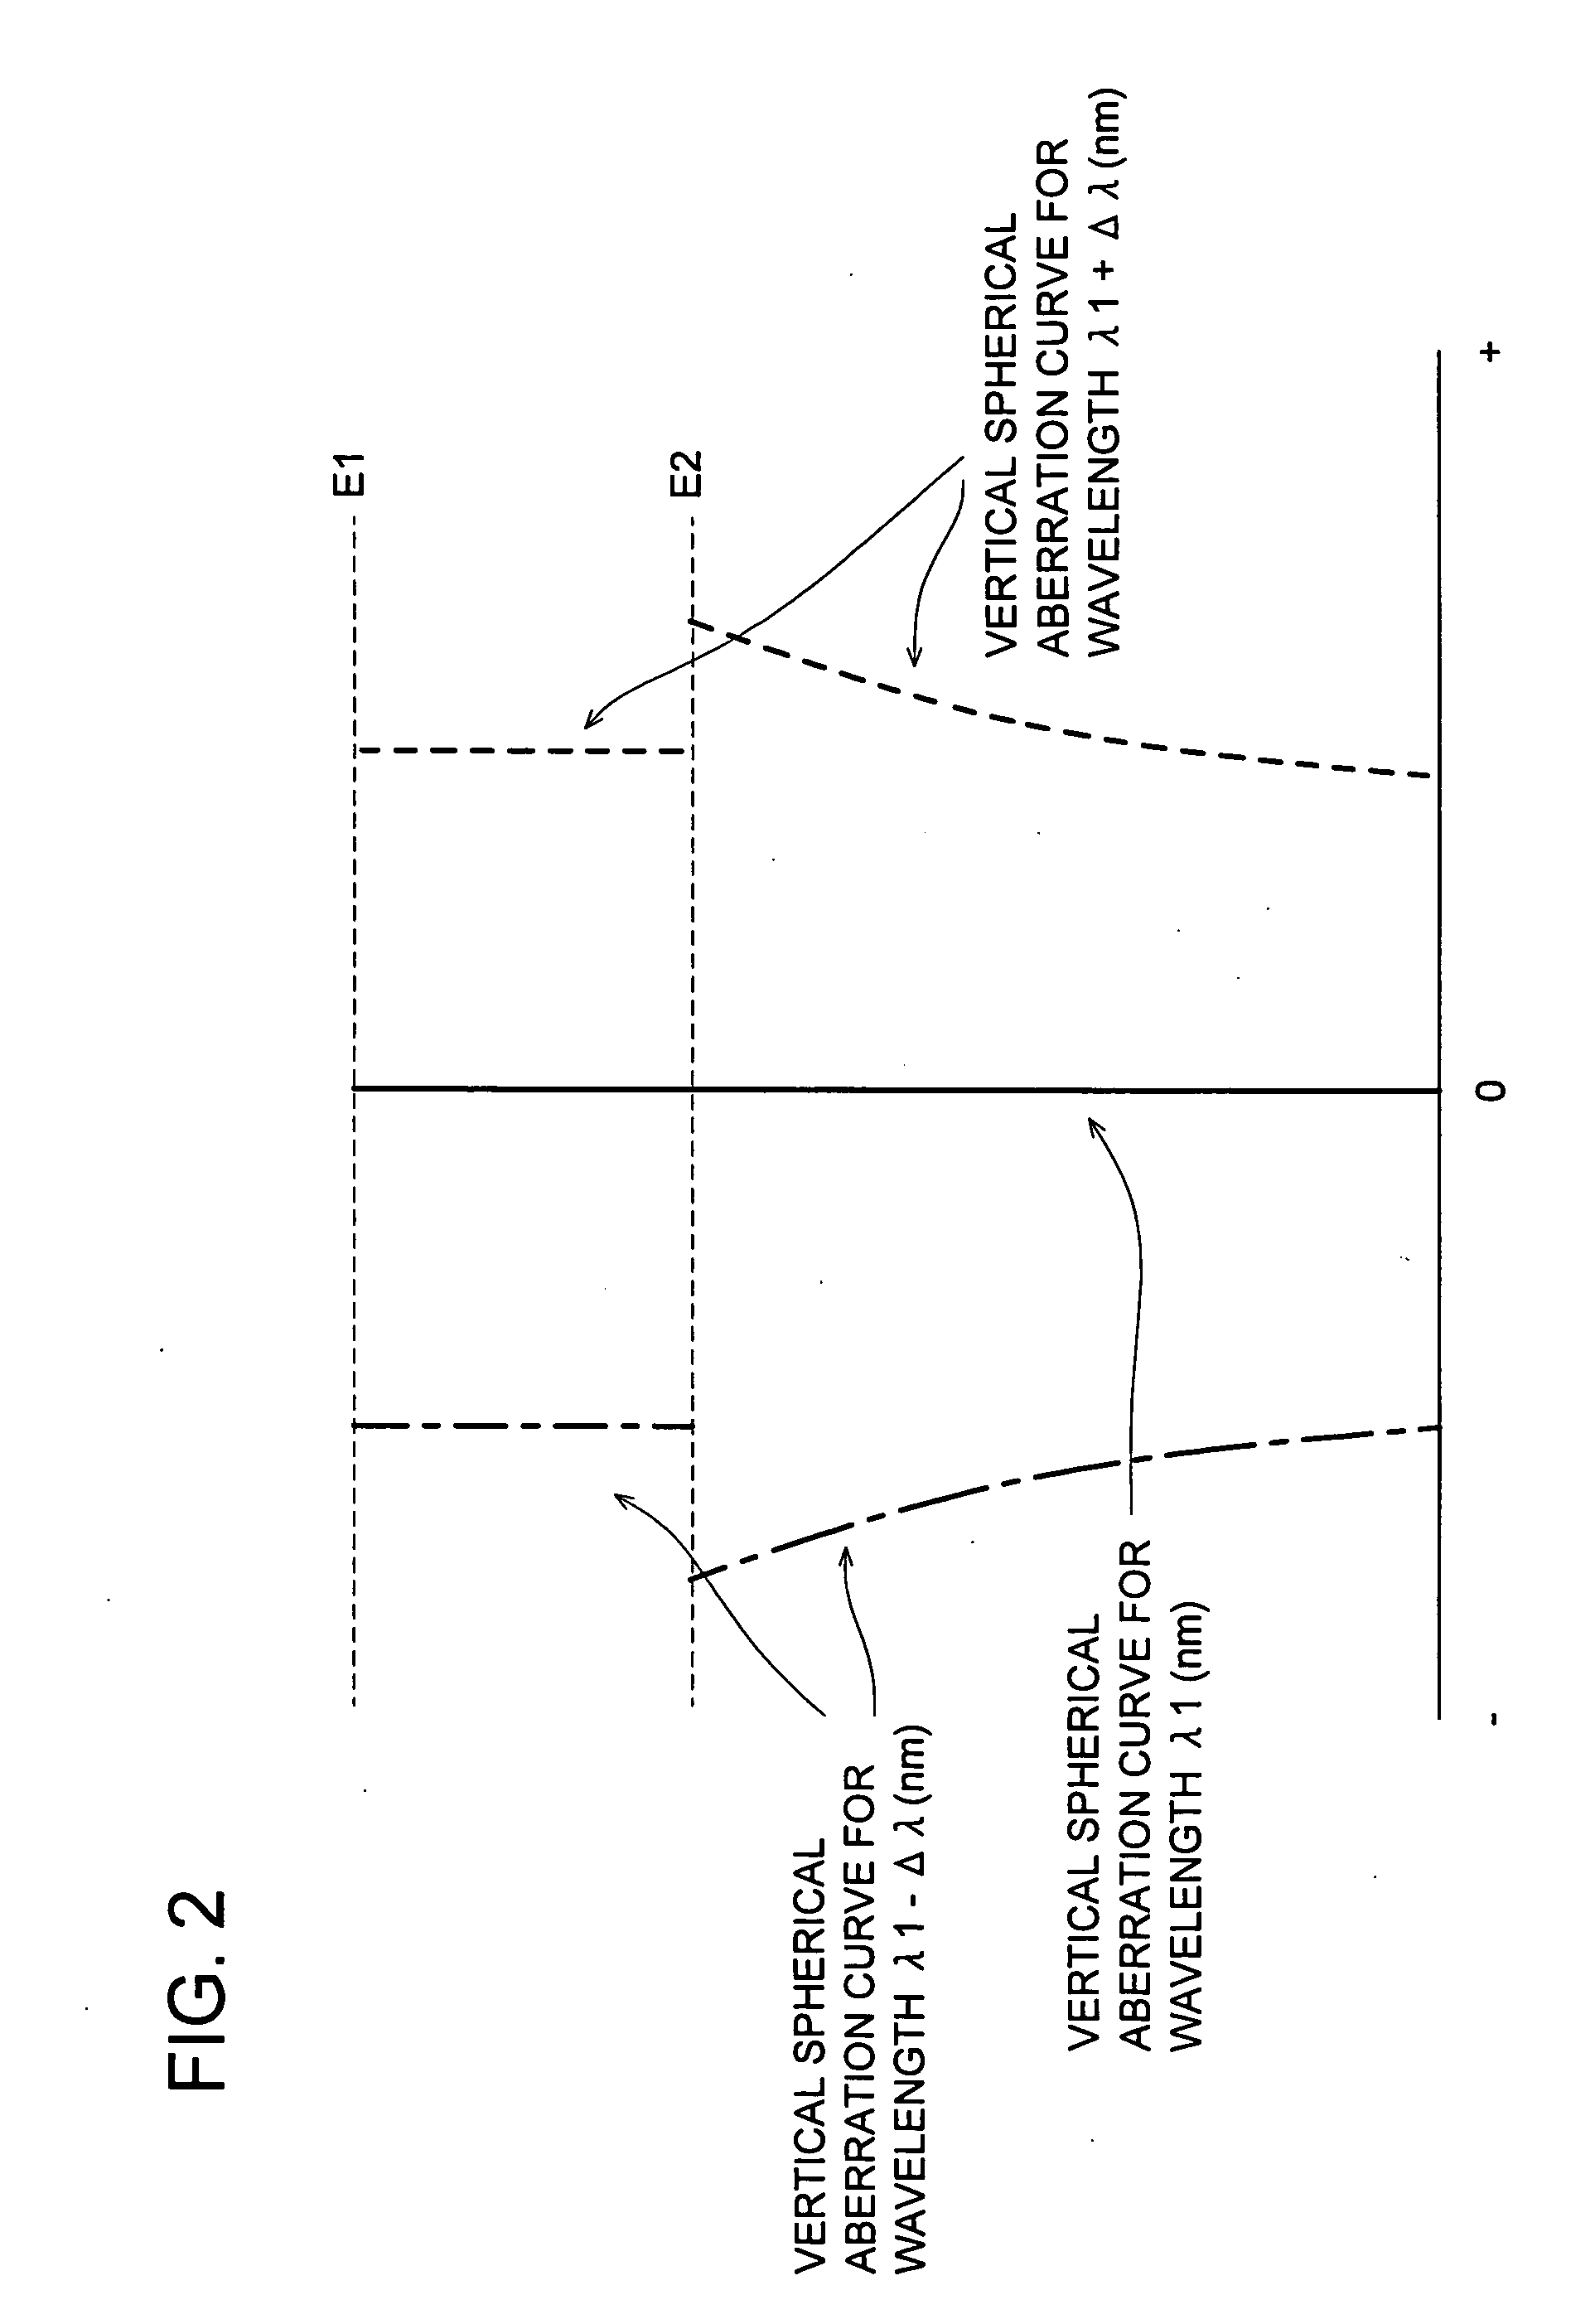 Objective lens, optical pickup apparatus and optical information recording and/ or reproducing apparatus